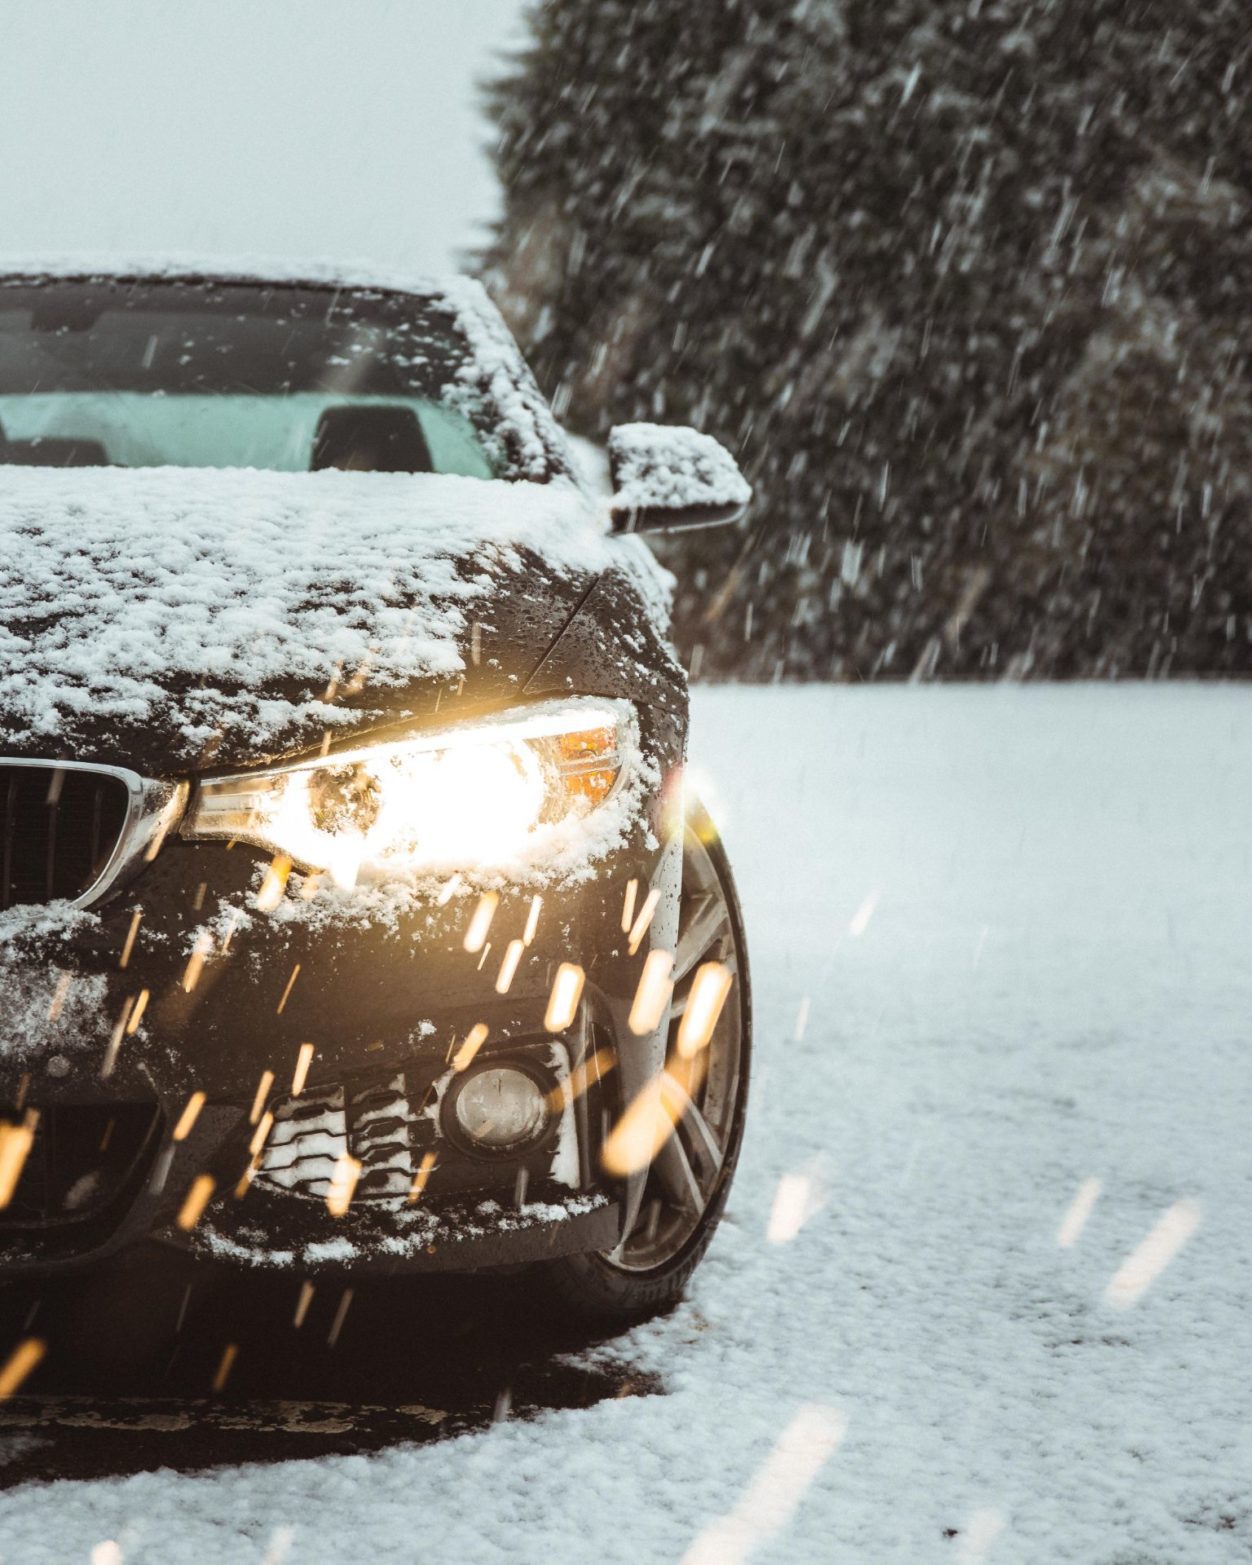 snow falling on a black car with lights on, highlighting winter driving